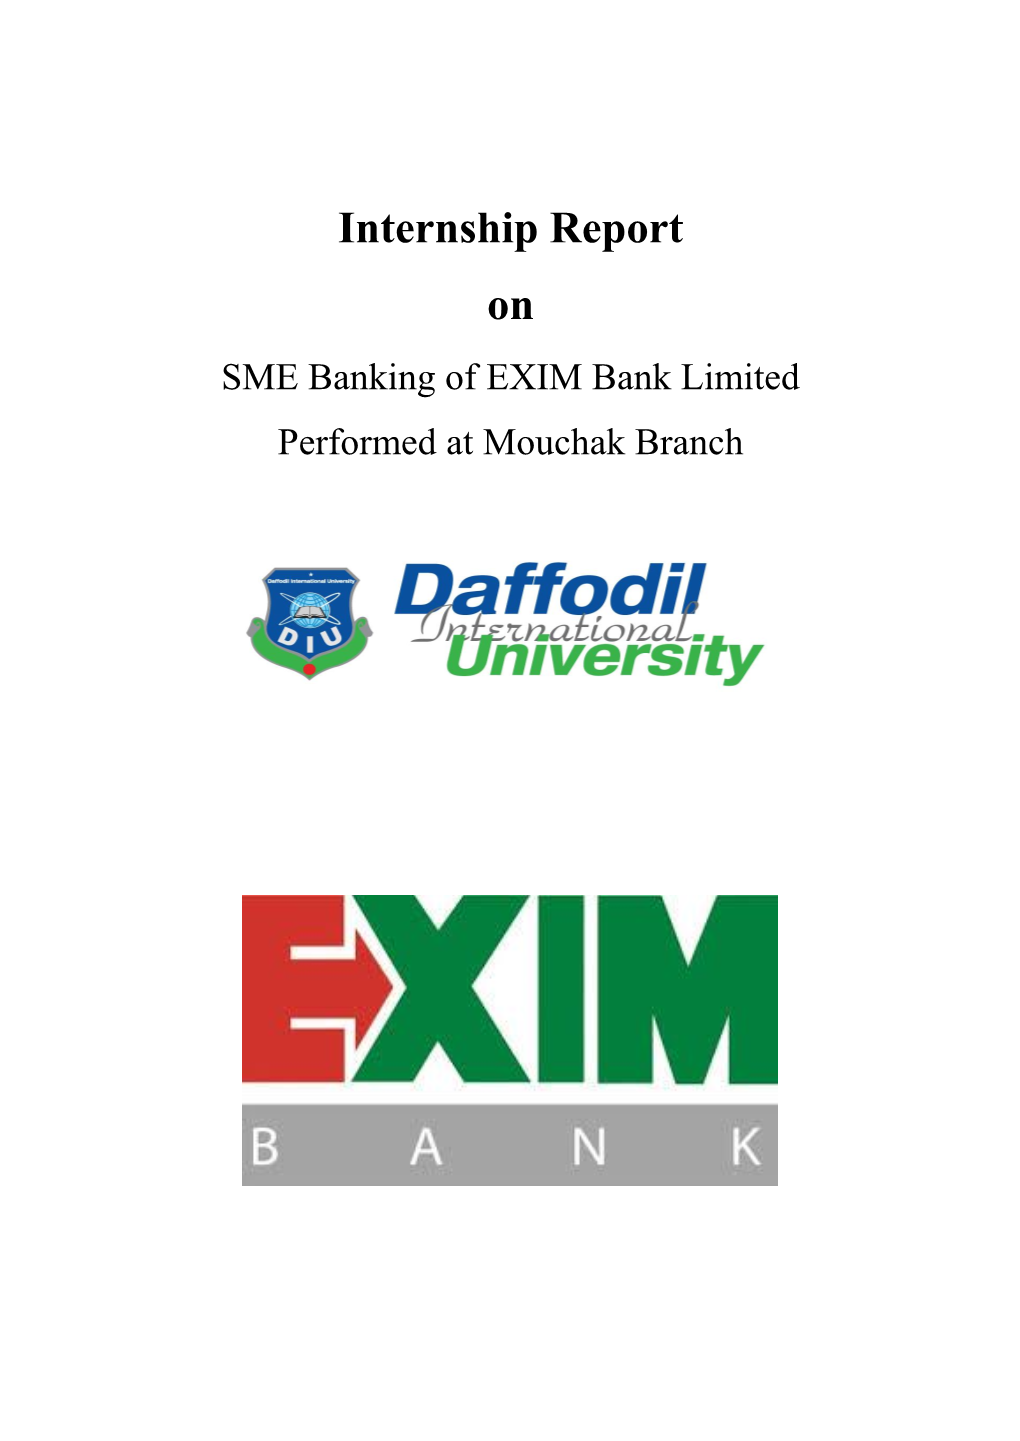 Internship Report on SME Banking of EXIM Bank Limited Performed at Mouchak Branch